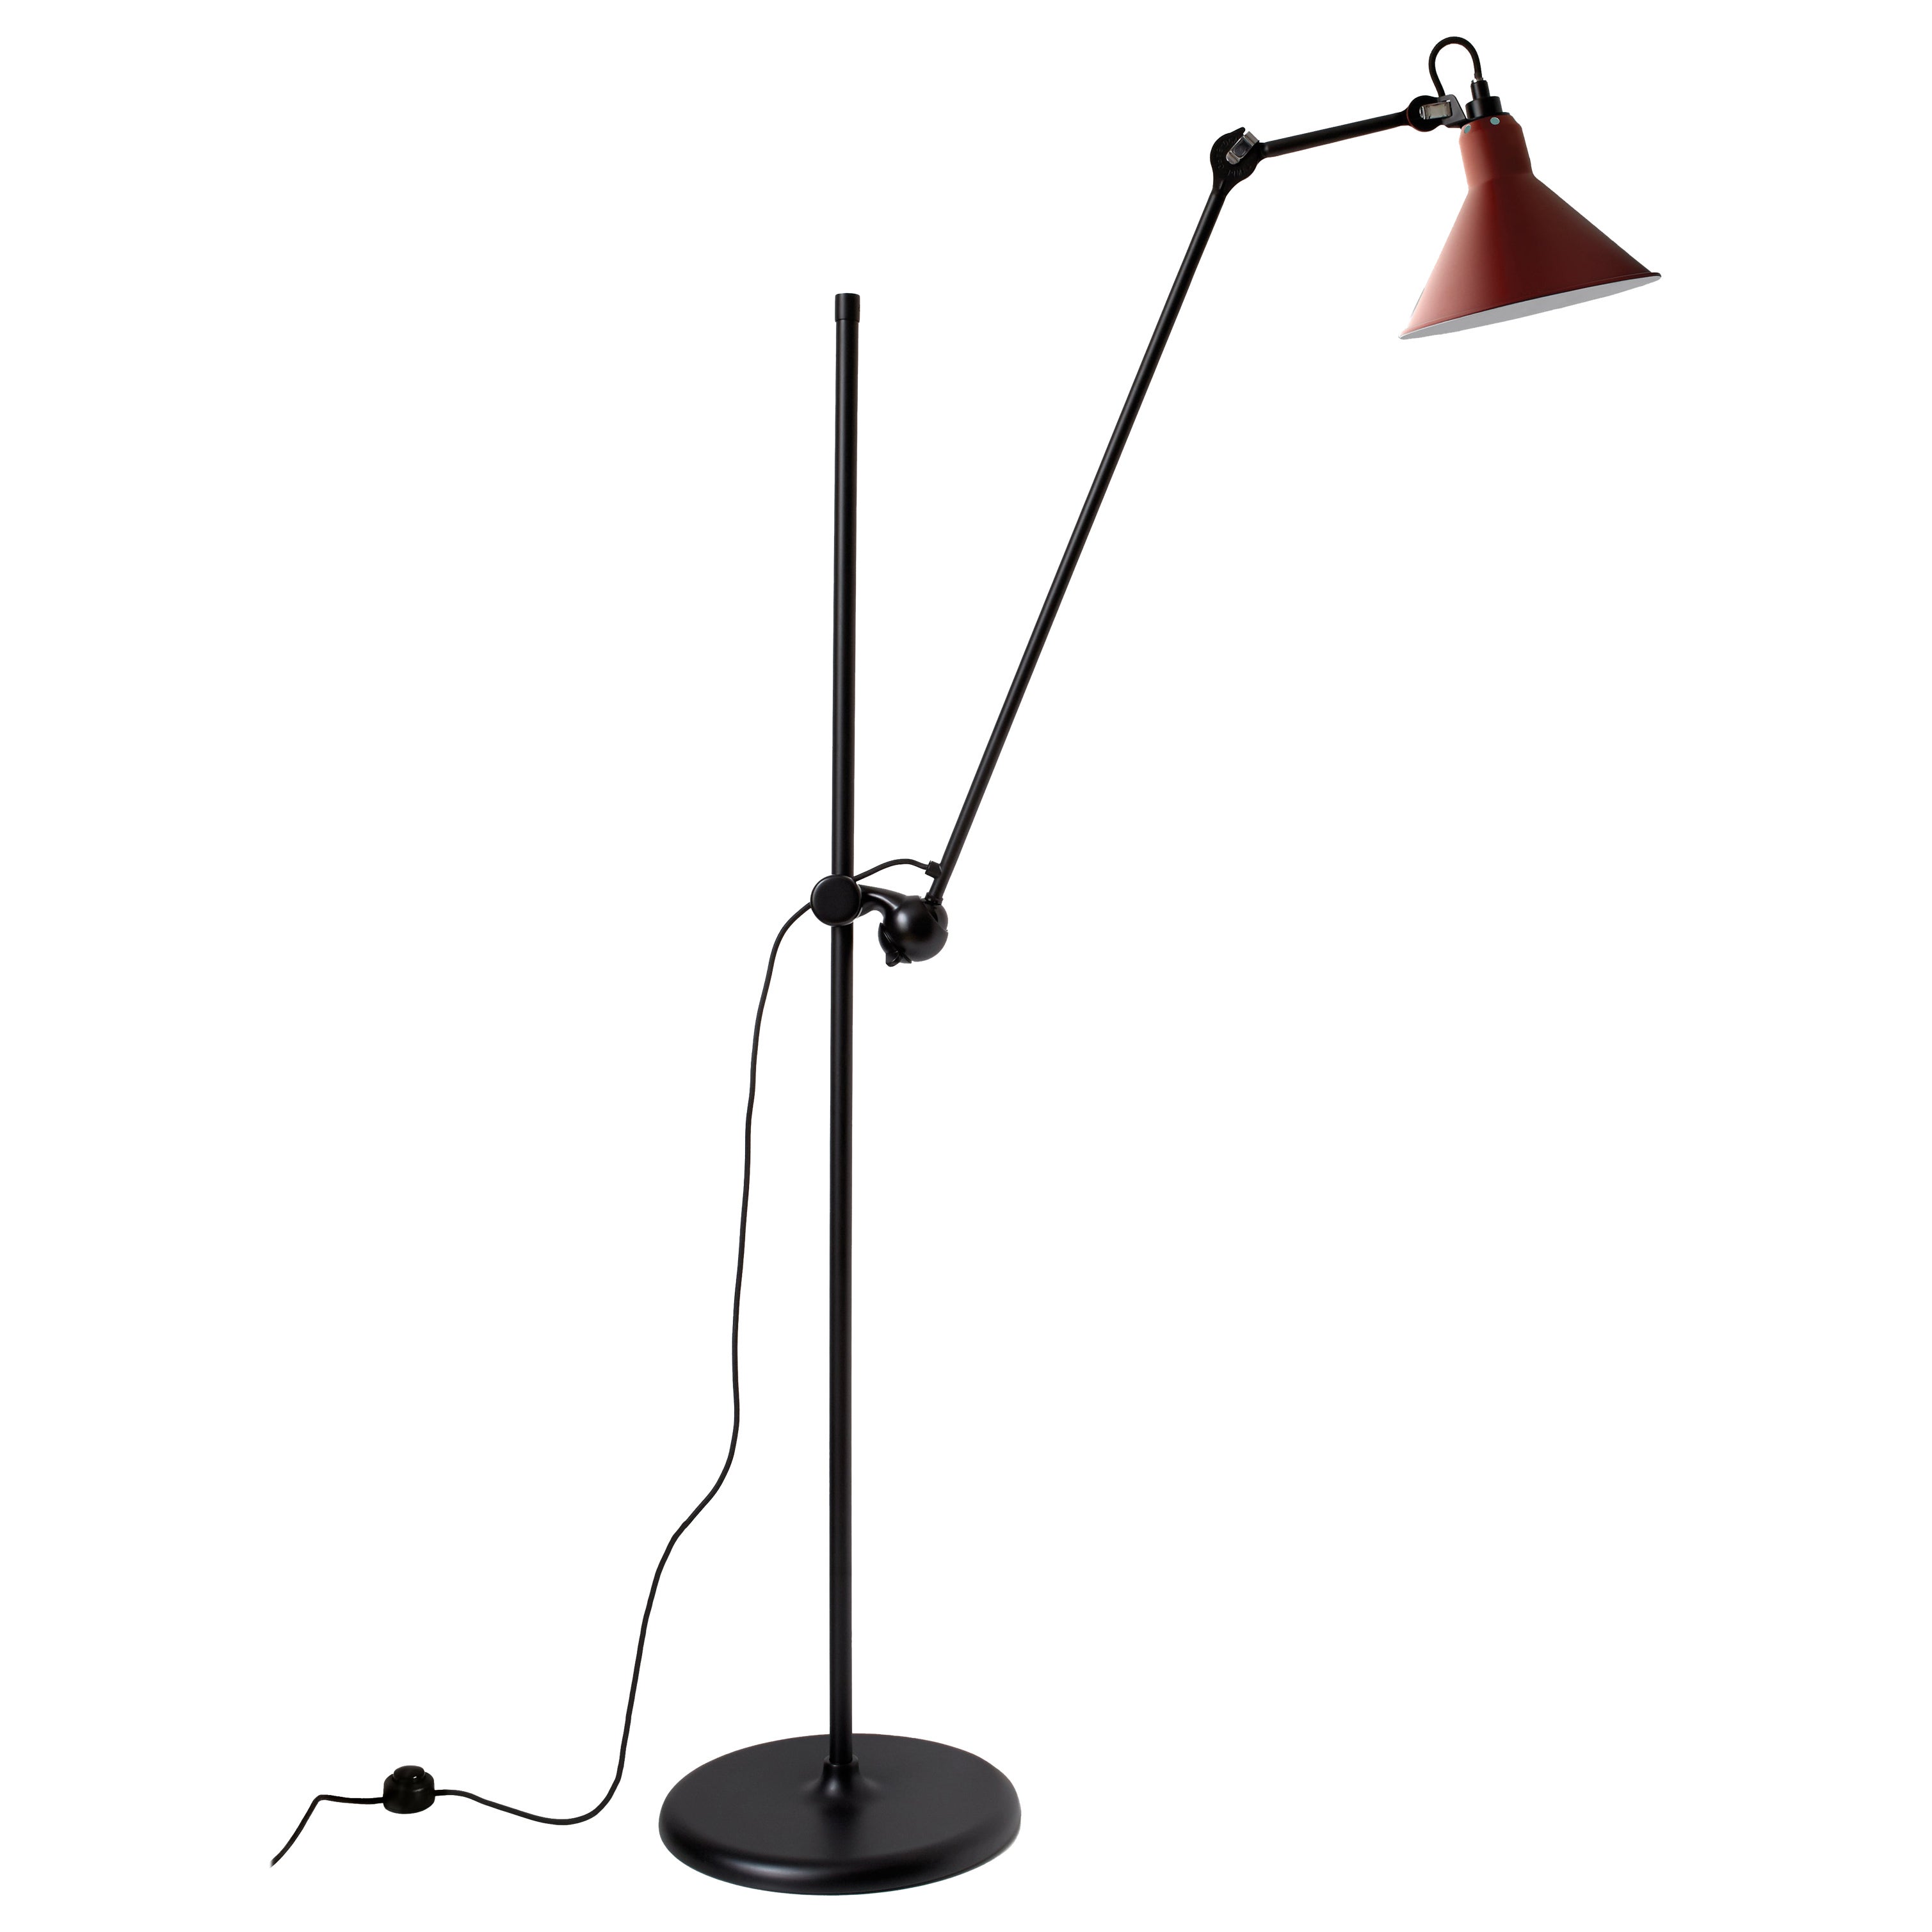 DCW Editions La Lampe Gras N°215 Floor Lamp in Black Arm and Red Shade